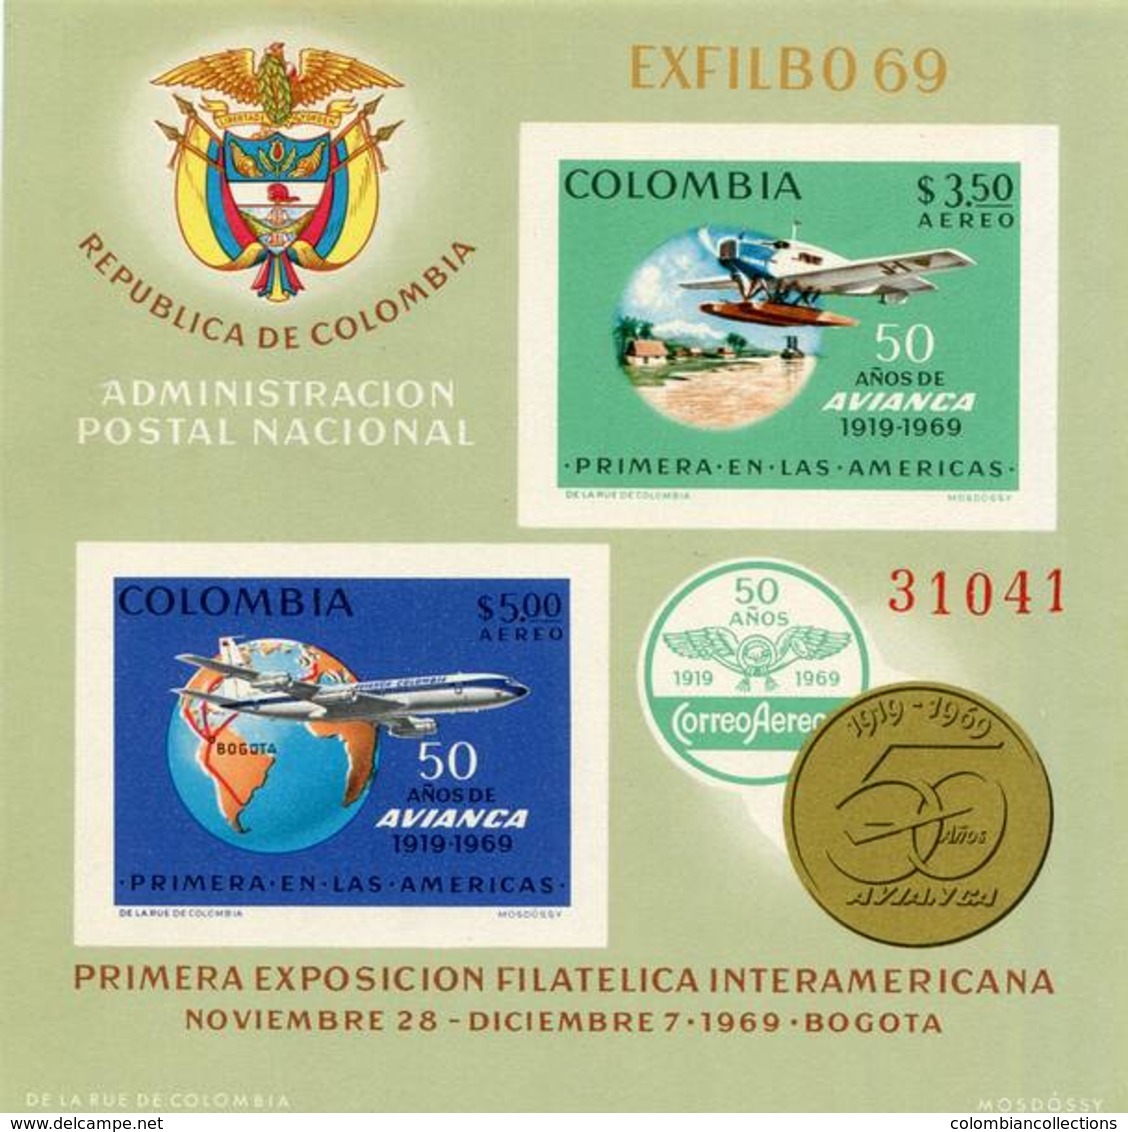 Lote HF31F, Colombia, 1969, HF, SS, 50 Años Del Primer Vuelo Postal, Airplane, Map, Expo, Hydroplane, Coat Of Arms - Colombia